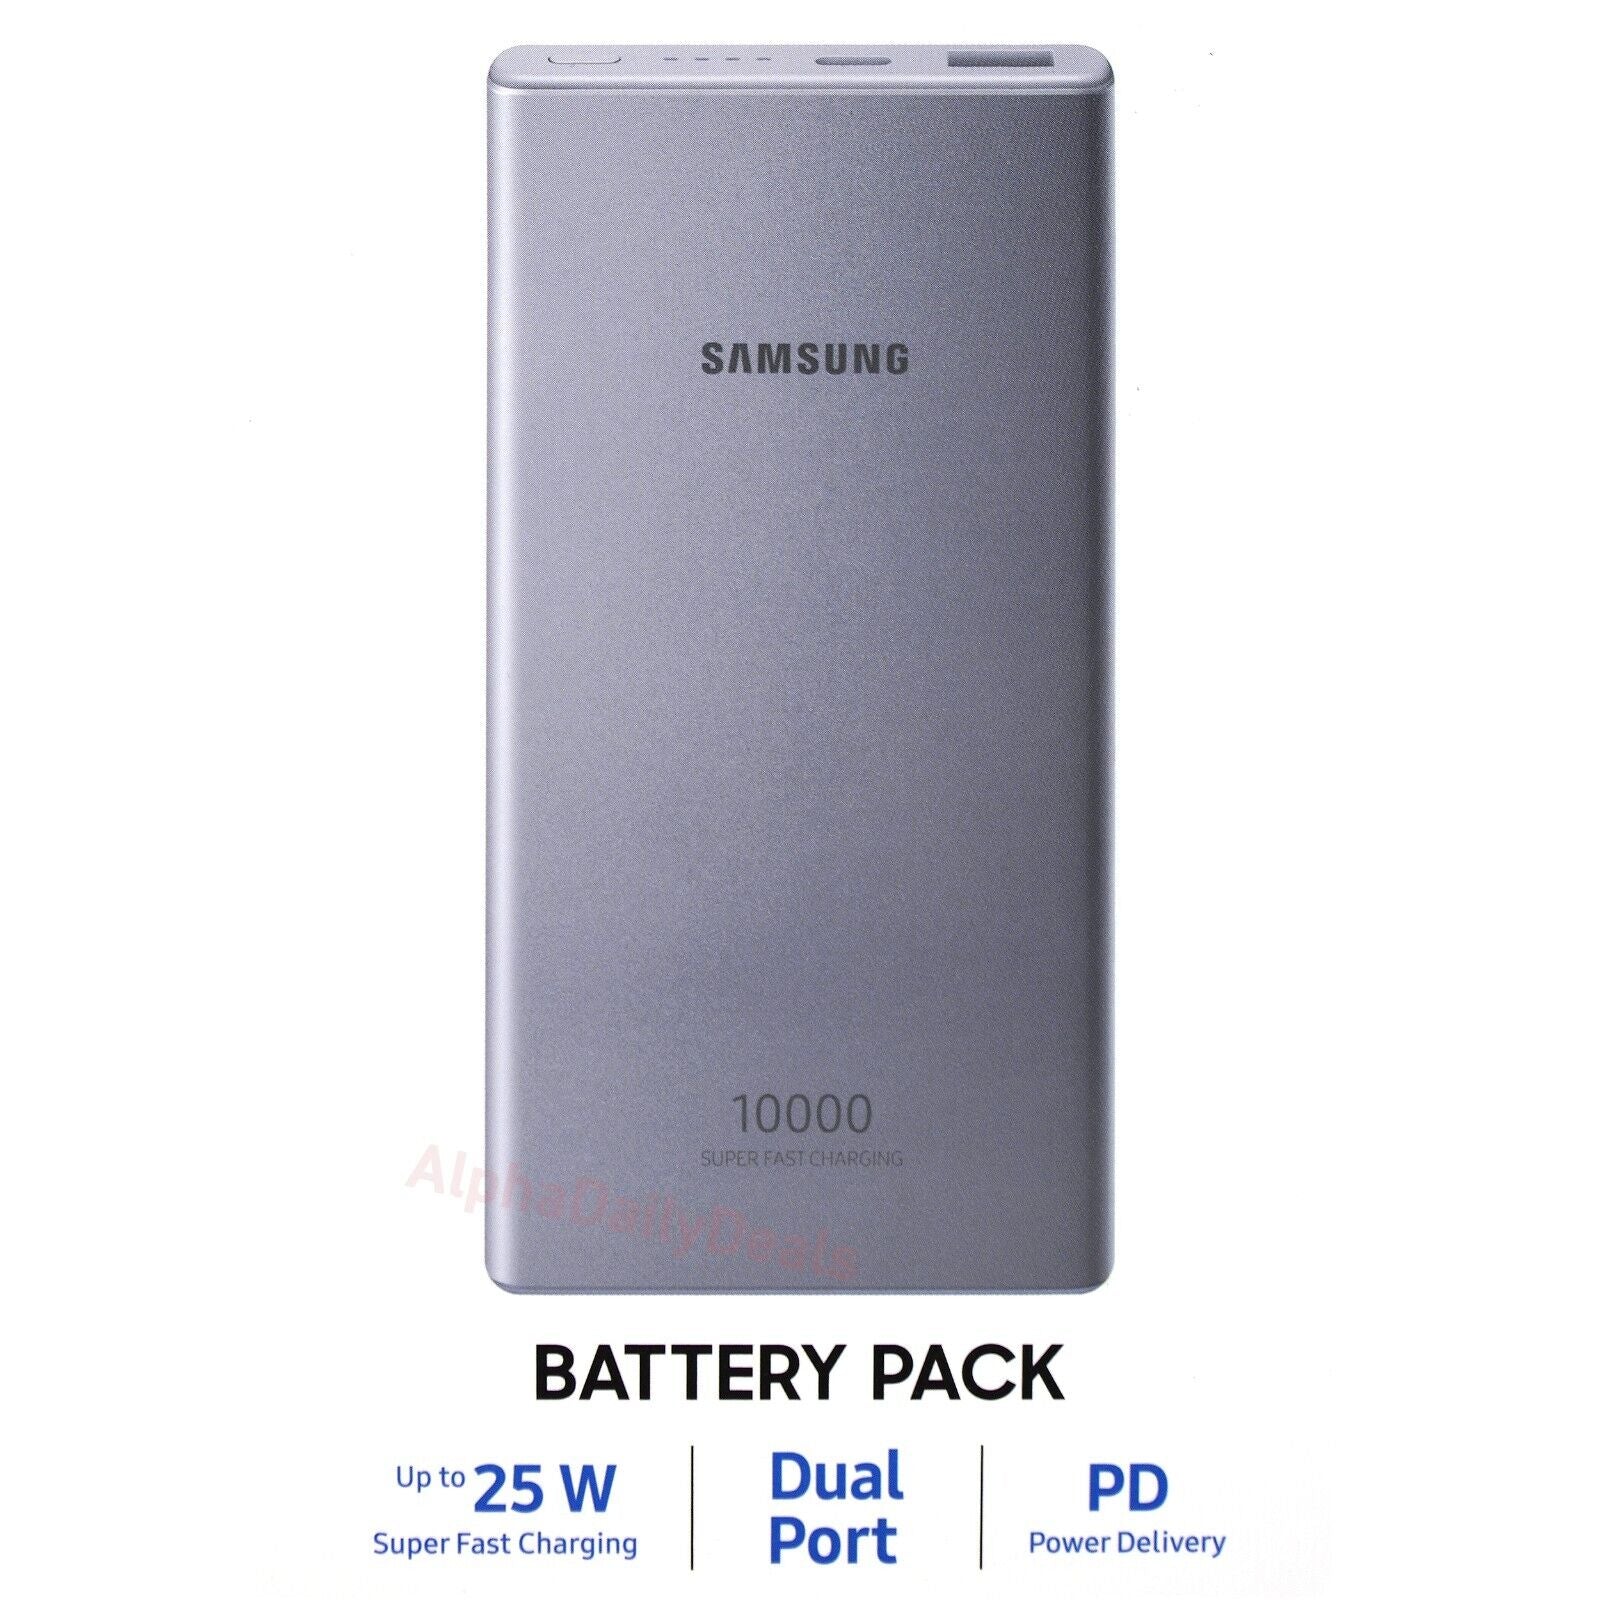 NEW Samsung 25W Super Fast Charging Battery Power Pack 10000 mAh Silver